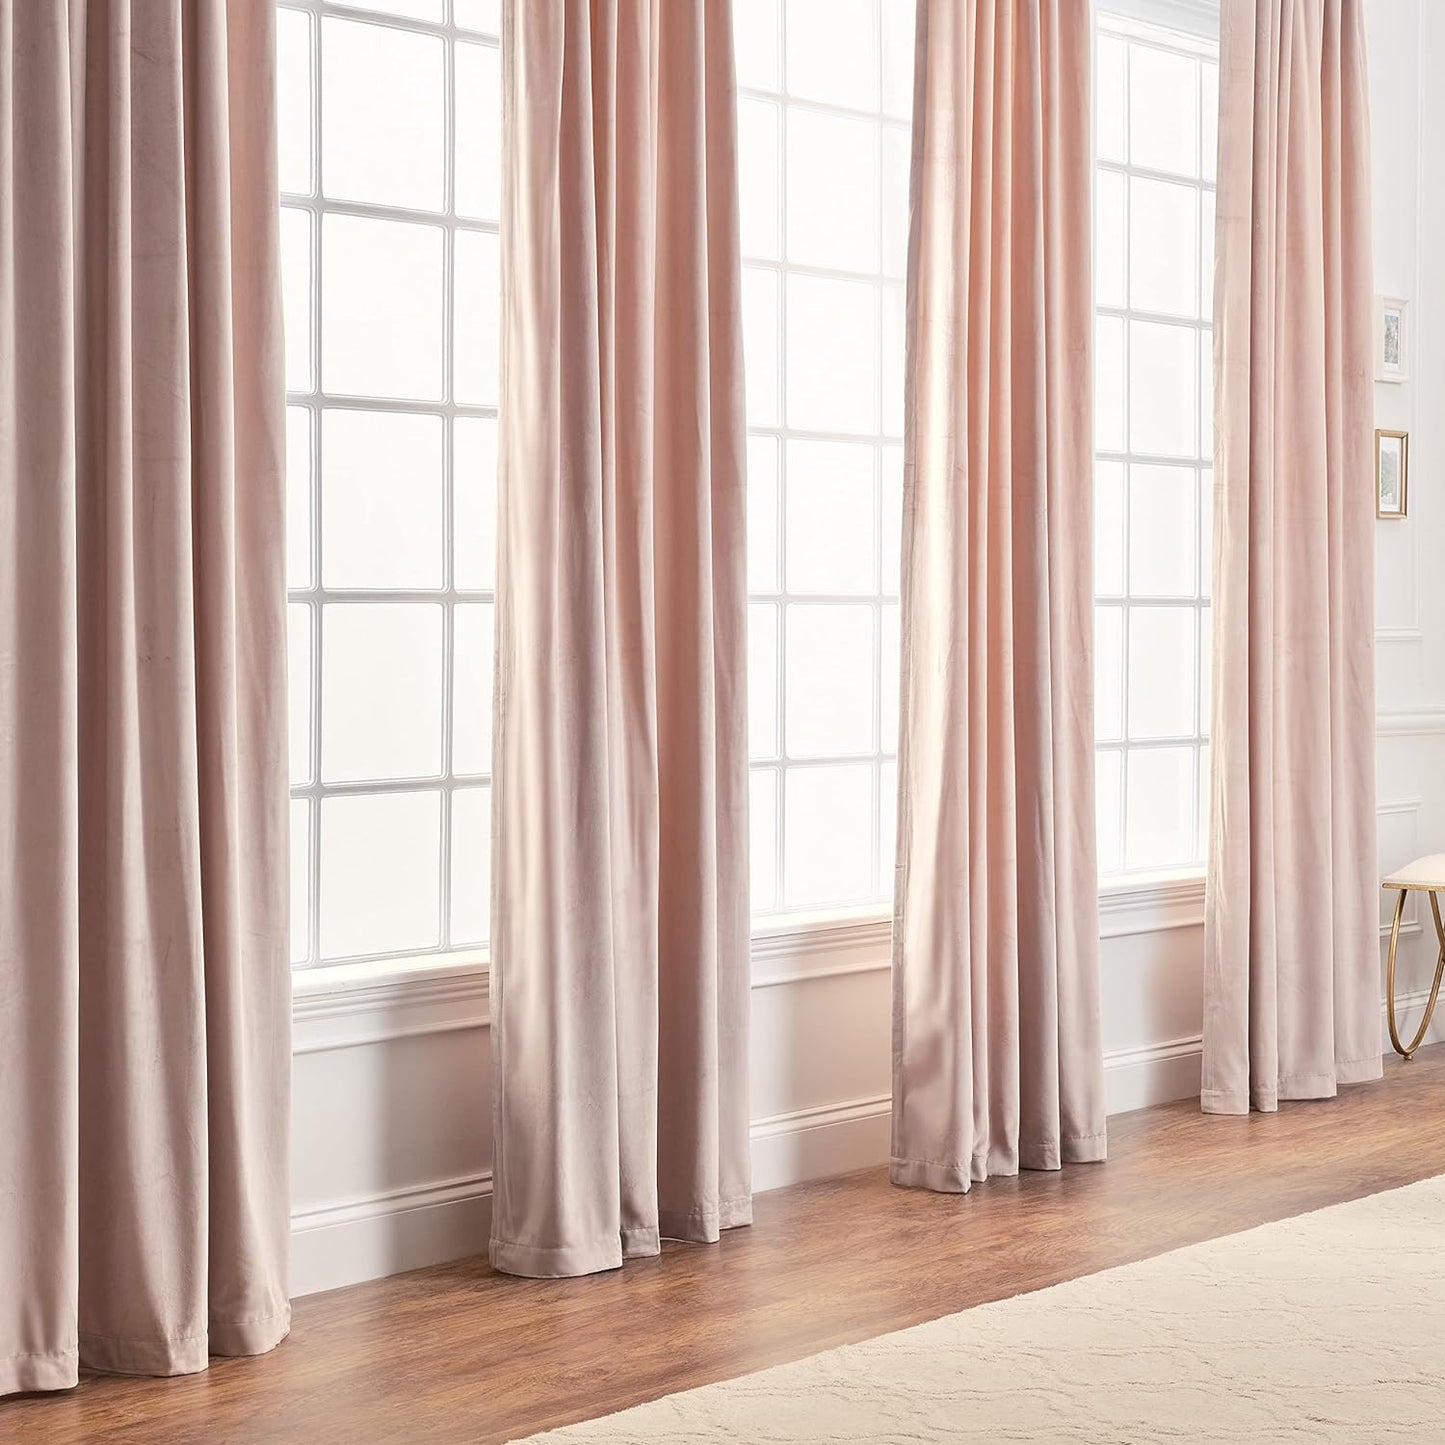 Chanasya Premium Solid Velvet Curtains - Classy and Solid Drapes for Living Room or Bedroom - 52" X 63" - Blush, 2 Panels  PurchaseCorner Blush W52Xh84 Inches 